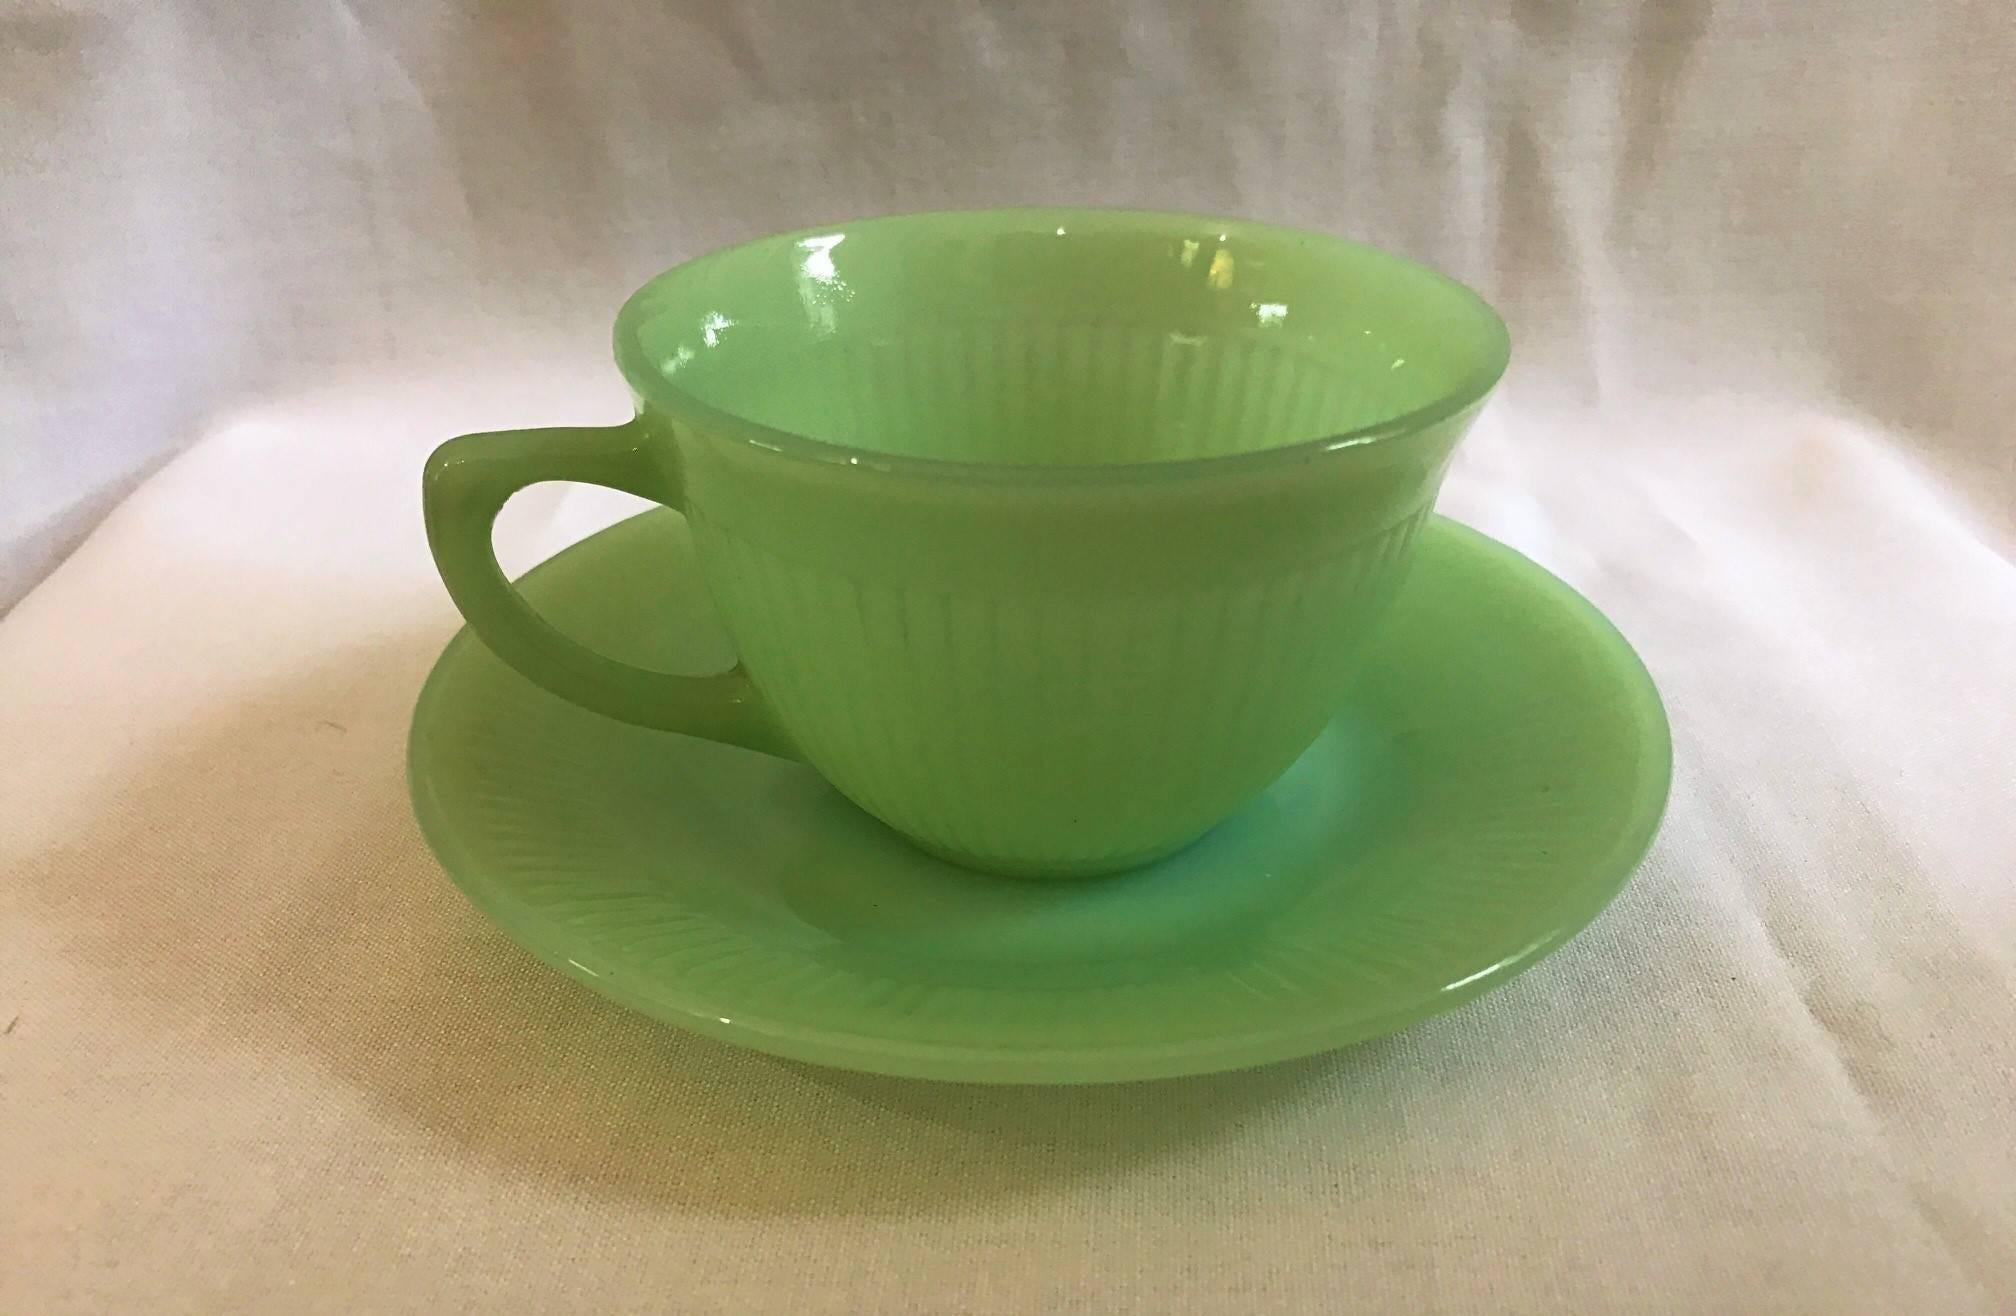 Terrific set of Jadeite - Fire King Anchor Hocking 12 cup 14 saucer set magnificent color! Fire King Jadeite, made of jade-green opaque milk glass. Popular in the mid-20th century. 

Cup:
H 2.5
D 3.75

Plate: 
D 6
Depth .5.